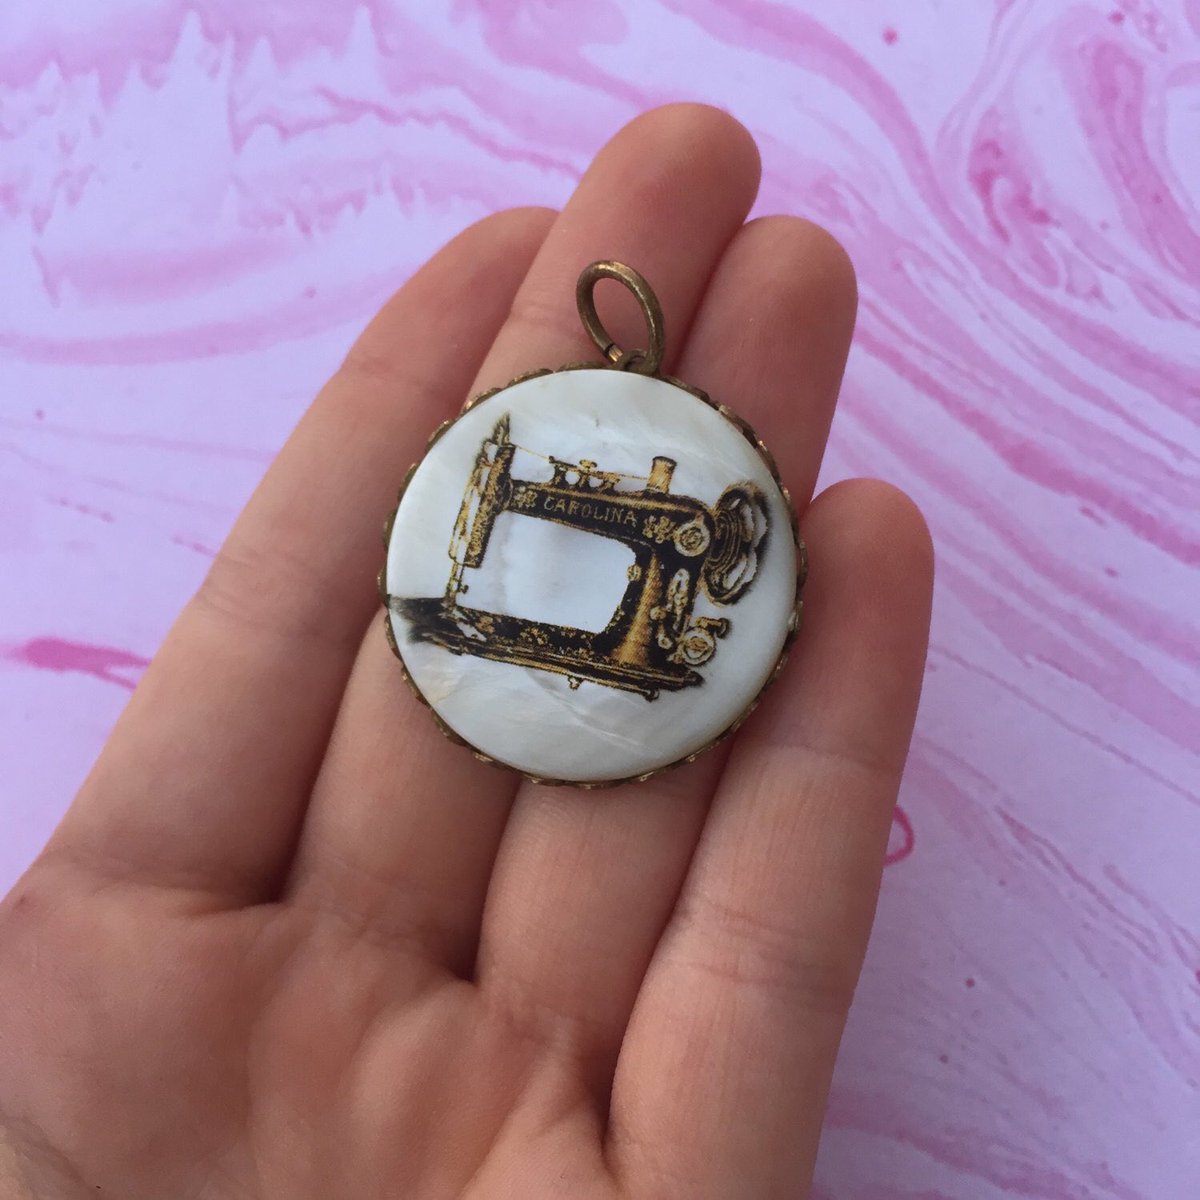 Excited to share the latest addition to my #etsy shop: Vintage Sewing Machine Pendant Pearlescent Background Carolina Sewing Machine Gold Toned Metal

 #jewelry #sewingmachine #vintagesewing #vintagependant #carolinasewing #sewingpendant #machinependant etsy.me/2SNn3NY